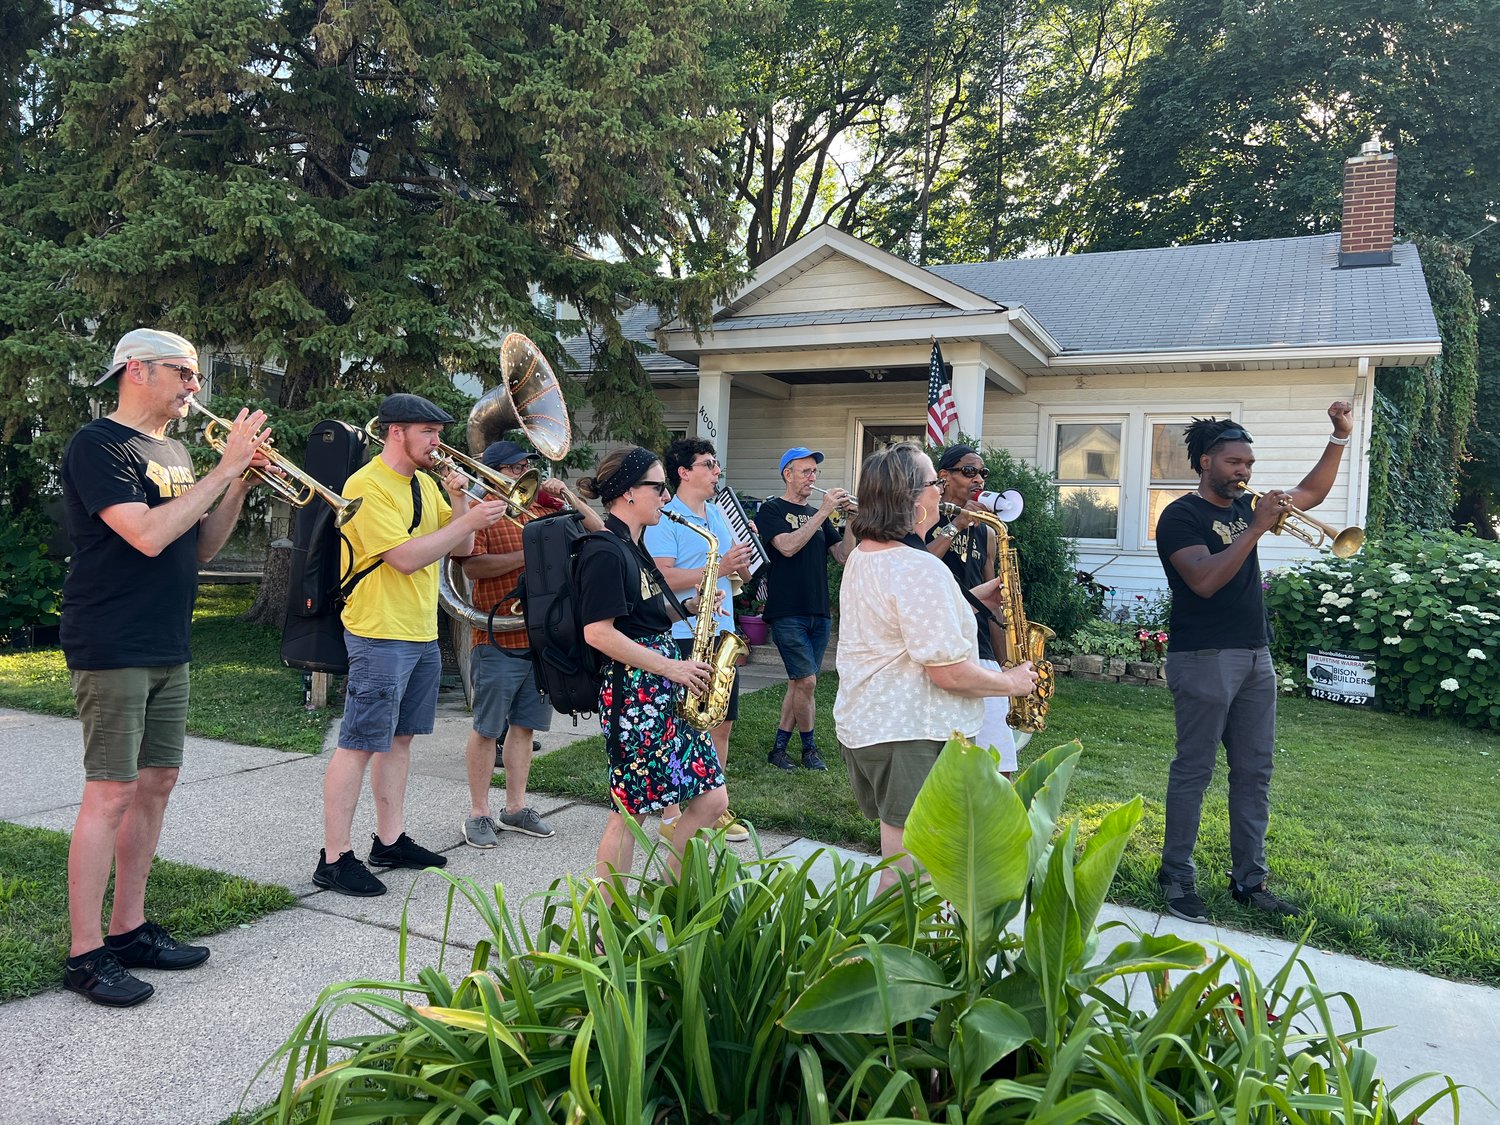 On July 11, Brass Solidarity plays a few tunes in front of the Arthur and Edith Lee house at 4600 Columbus where an angry mob gathered in 1931 to force the family out. (Photos by Jill Boogren)